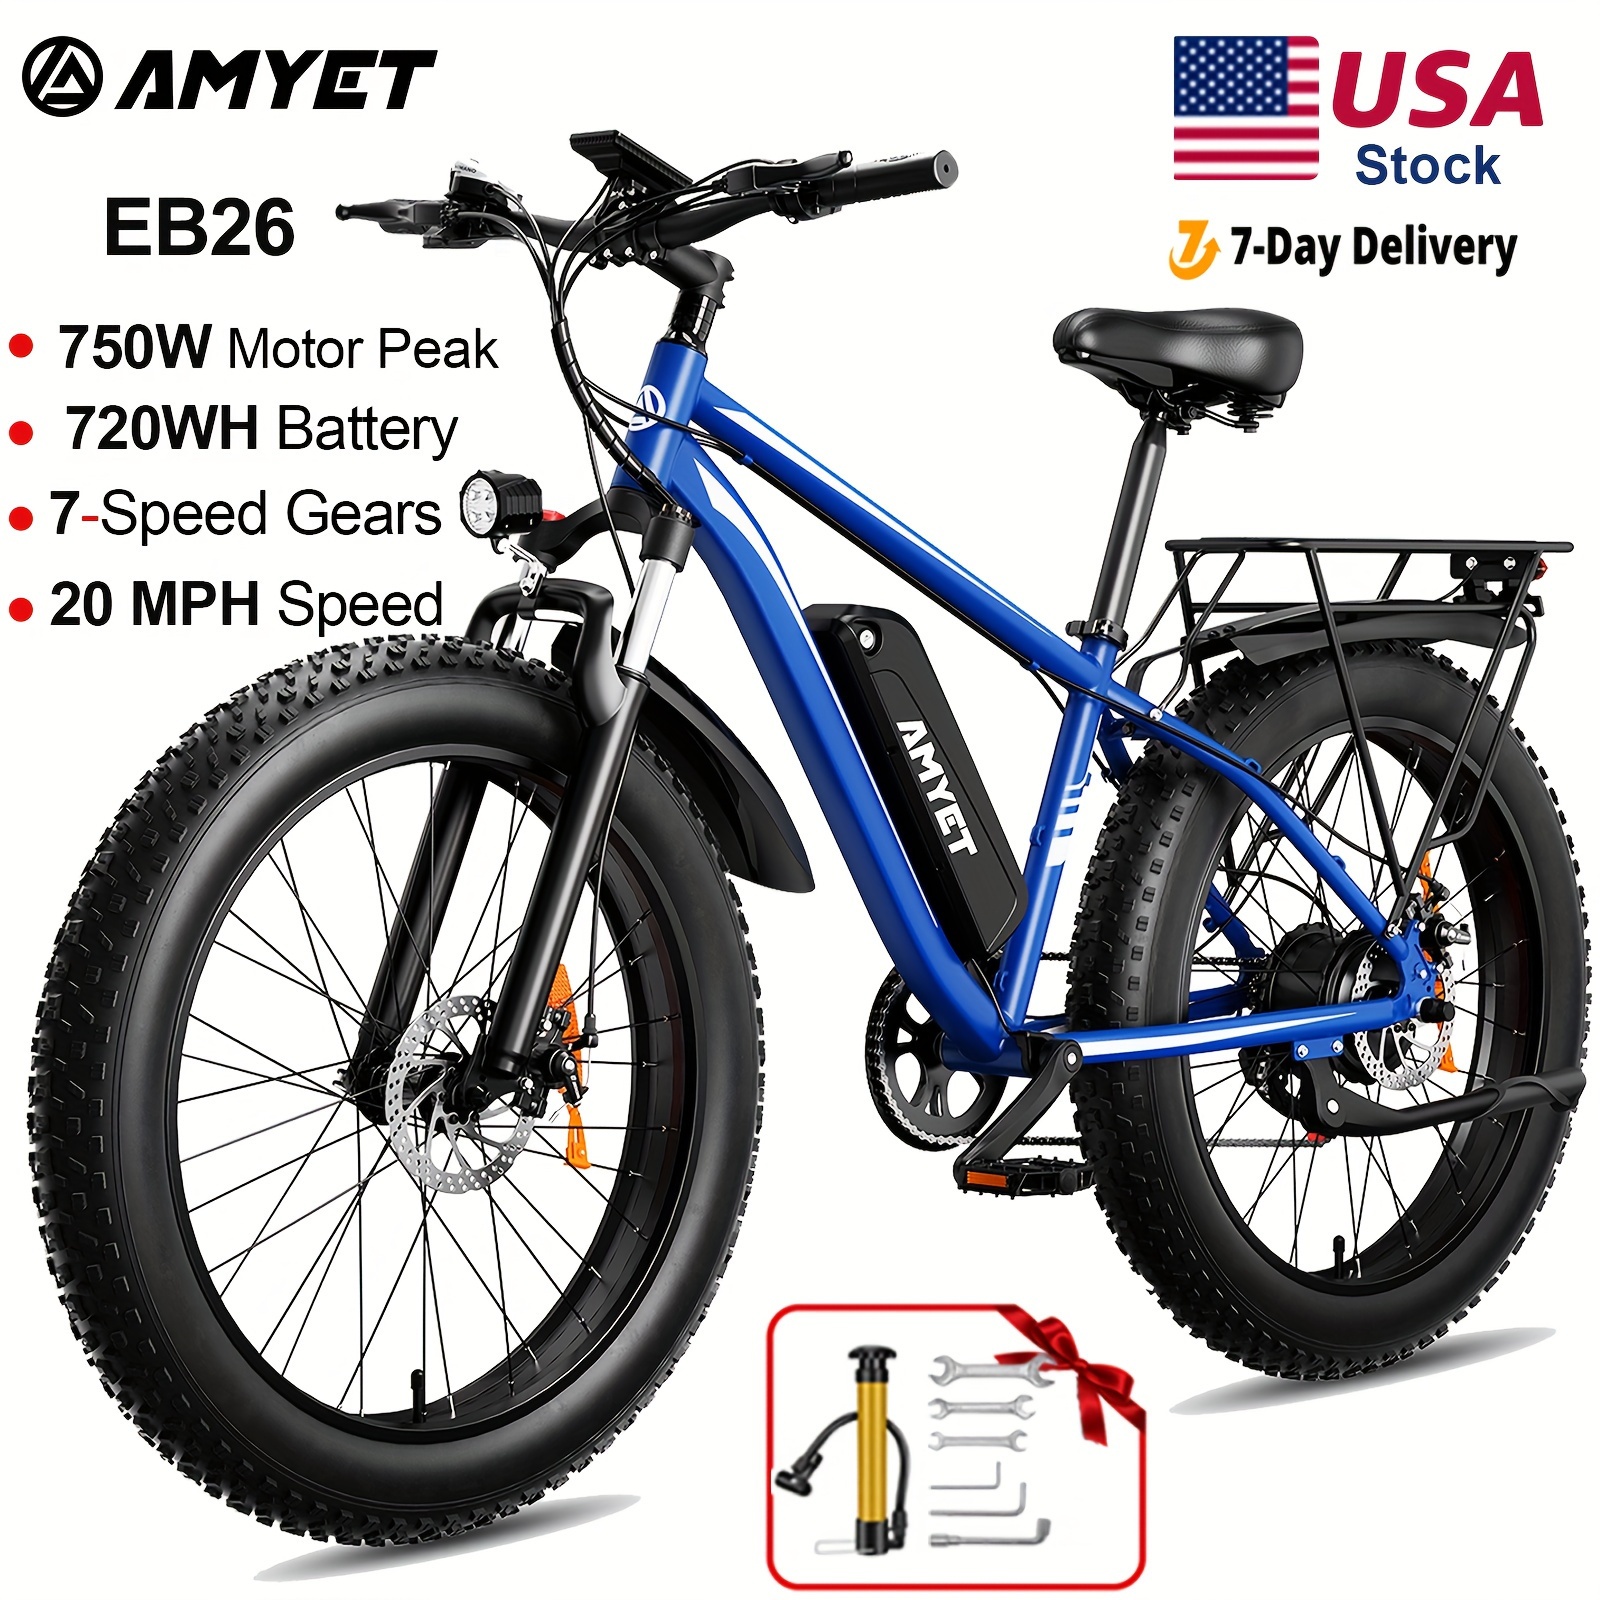 

Amyet 750w Electric Bike For Adults Electric Bicycle 48v 15ah Battery Electric Bike 26" Fat Tire Mountain 20mph 7 Speed Gears Dual Shock Absorber Electric Bike